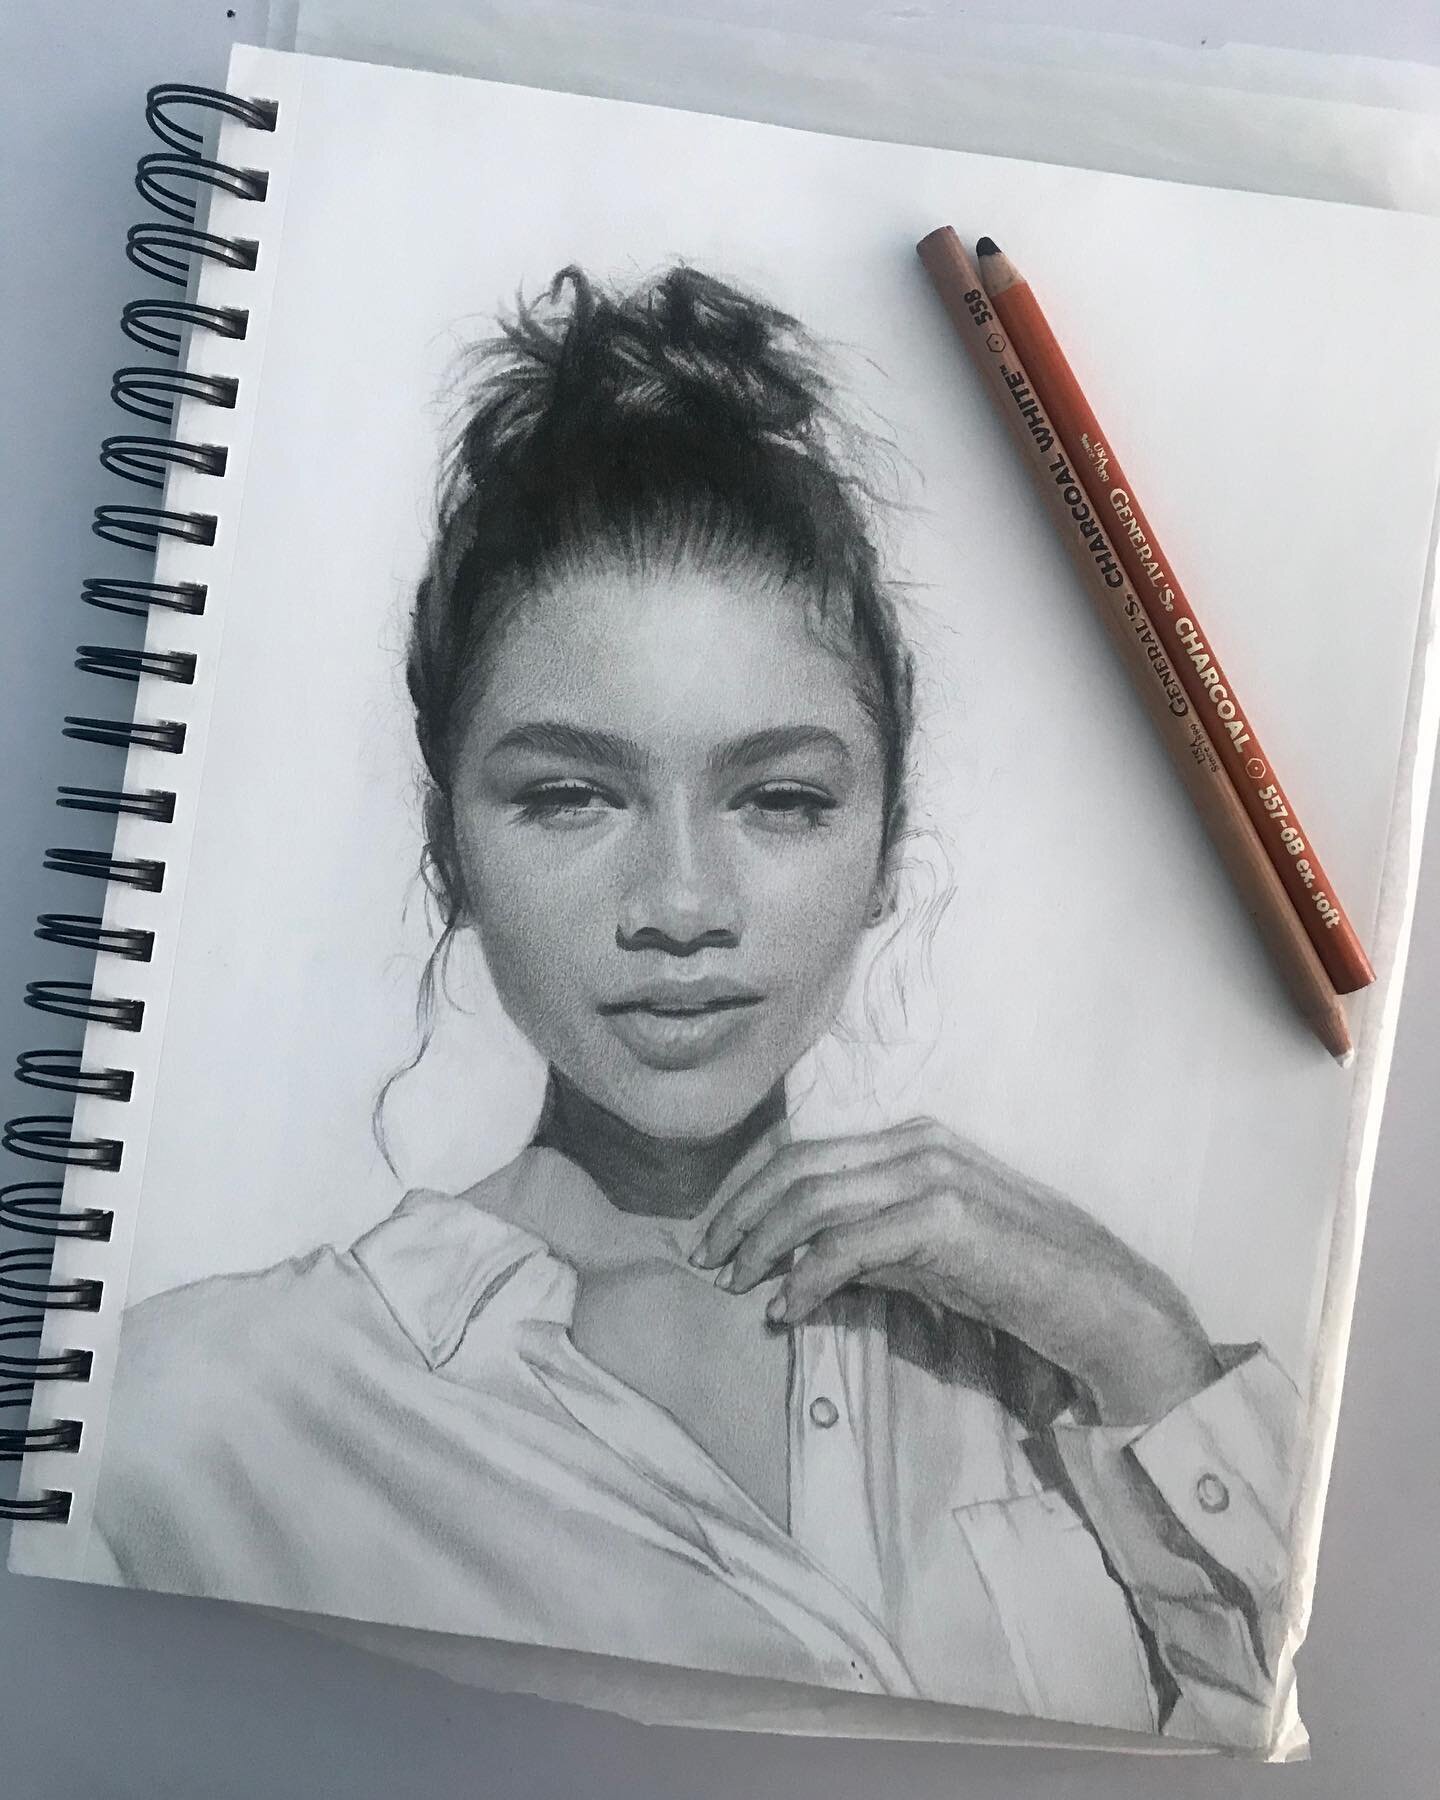 My @zendaya portrait, I started it in January but then never finished it. Decided that this week was the time to complete it

#portrait #zendaya #realisticdrawing #realisticart #pencildrawing #pencilillustration #profiledrawing #faceportrait #facepro